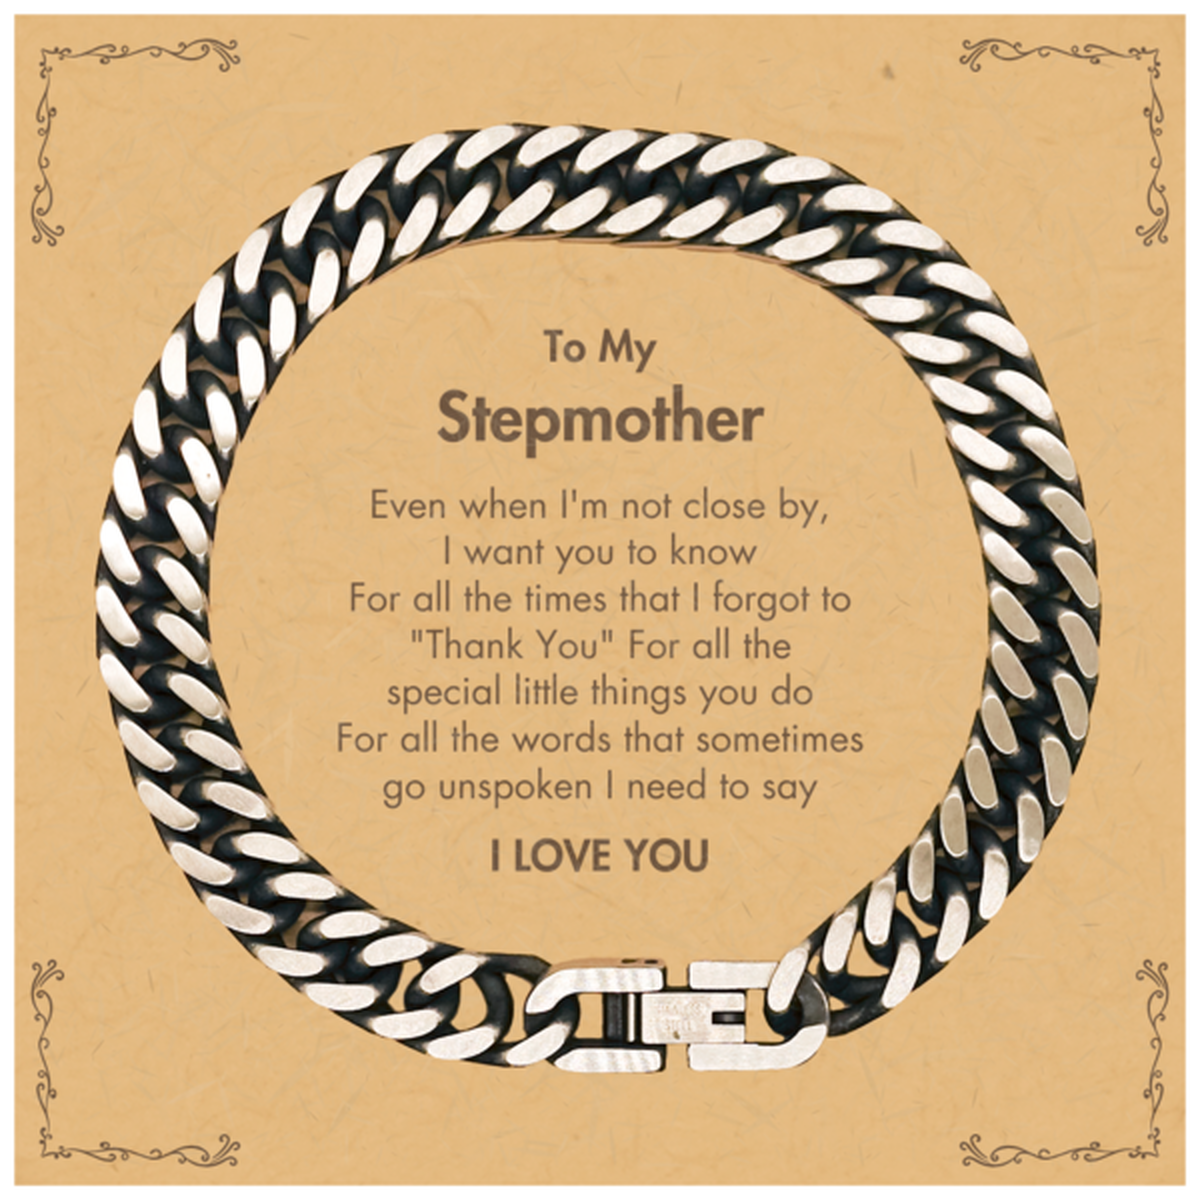 Thank You Gifts for Stepmother, Keepsake Cuban Link Chain Bracelet Gifts for Stepmother Birthday Mother's day Father's Day Stepmother For all the words That sometimes go unspoken I need to say I LOVE YOU